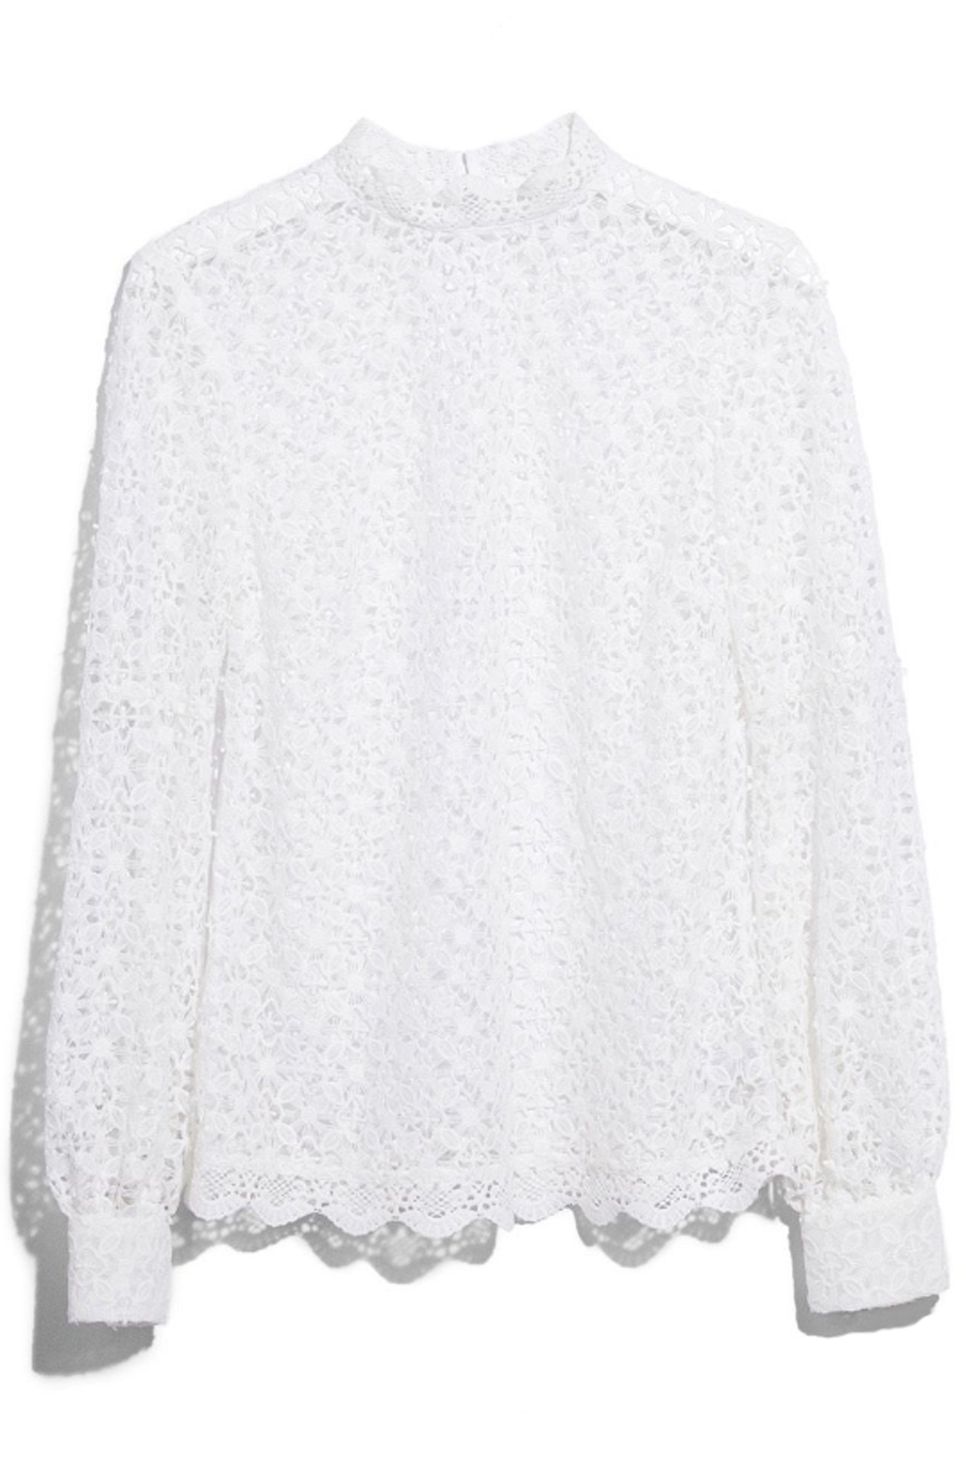 Clothing, White, Sleeve, Outerwear, Blouse, Neck, Lace, Shoulder, Collar, Top, 